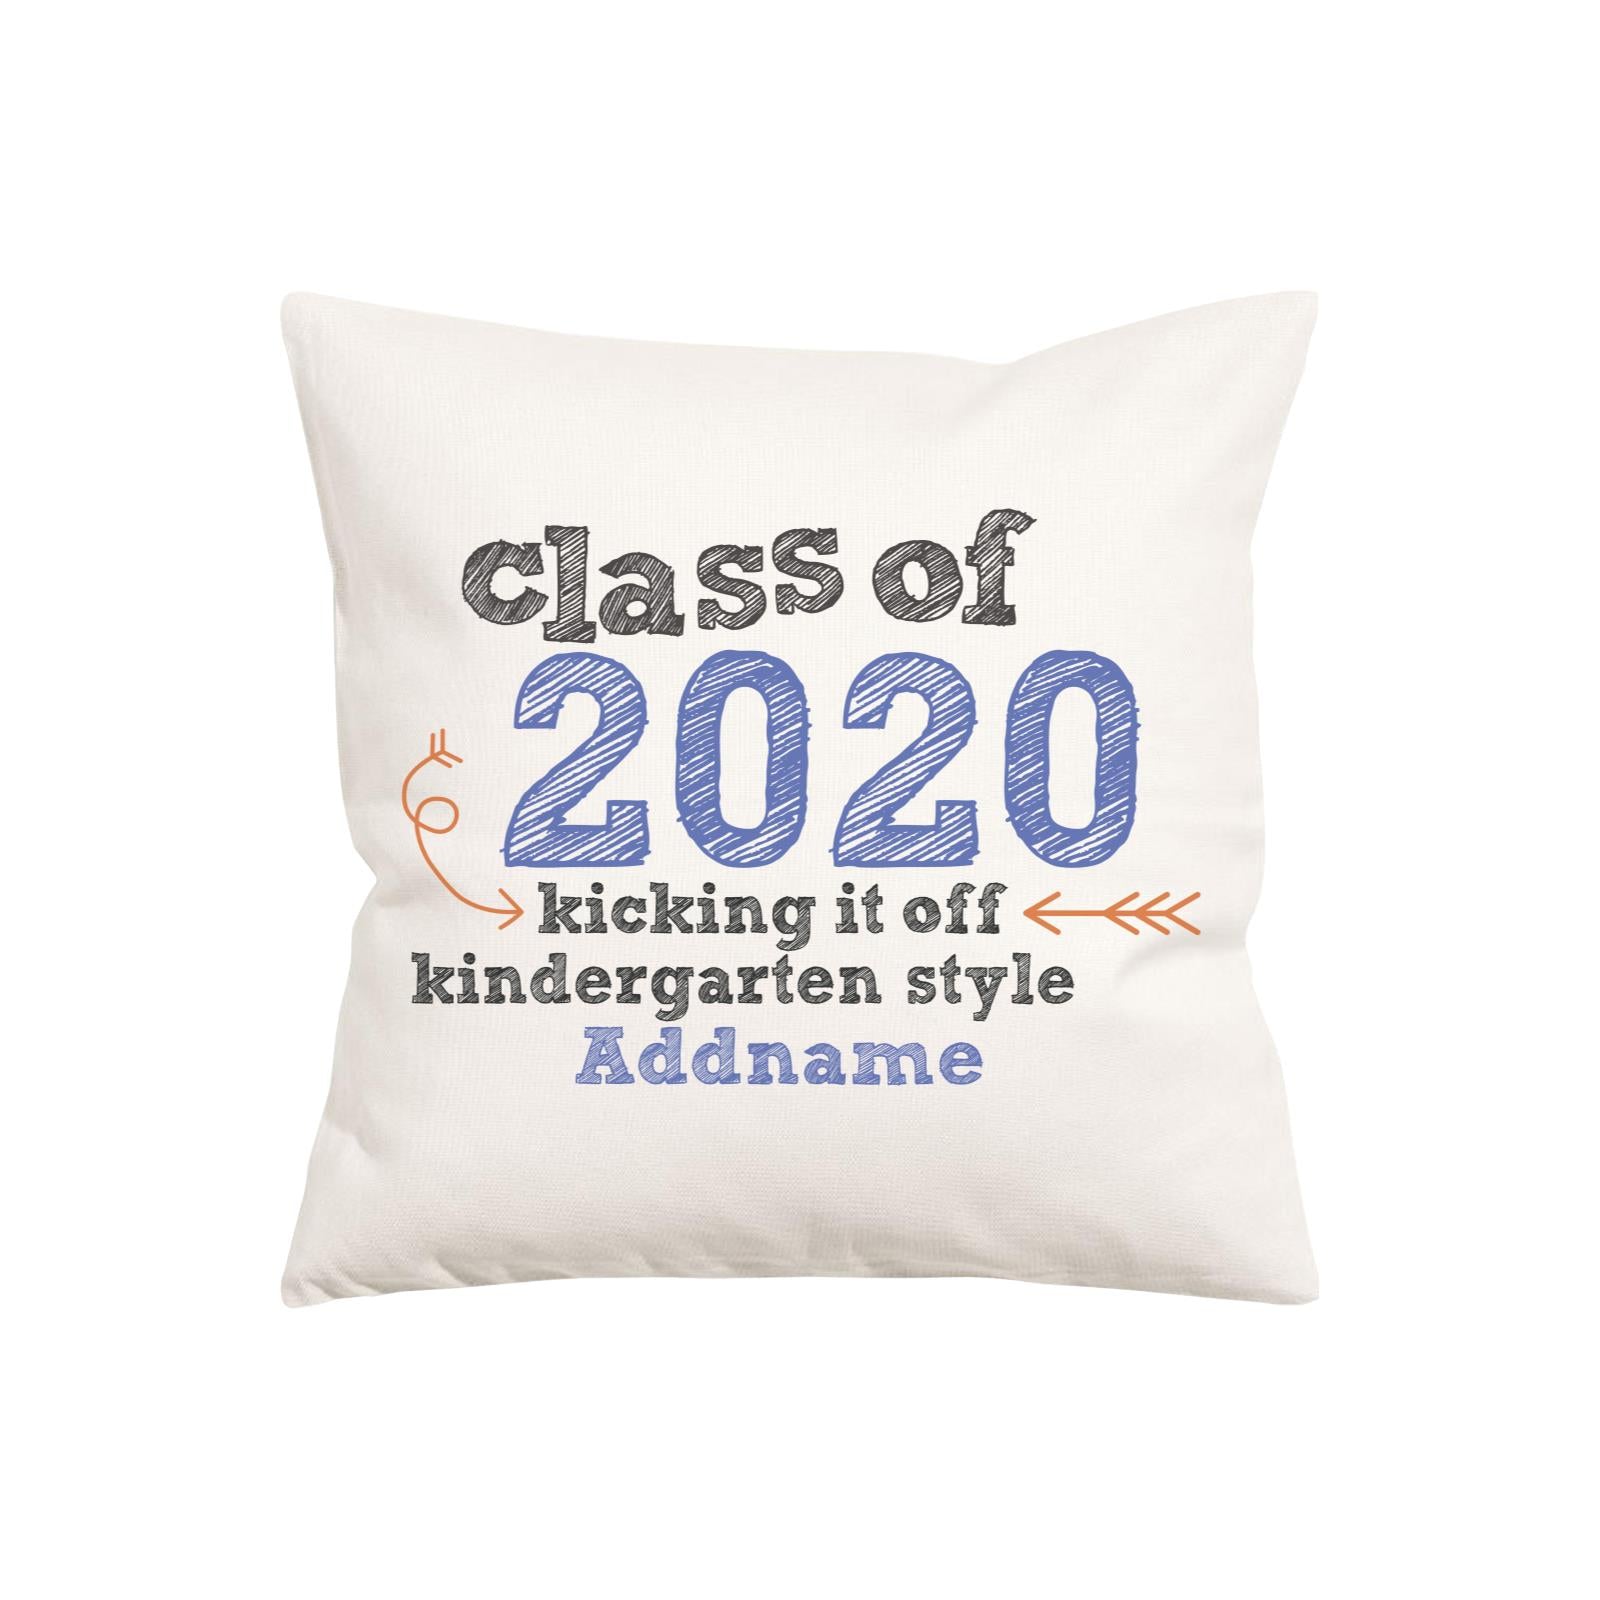 Graduation Series Kicking it off Kindergarten Style Pillow Cushion Cover with Inner Cushion